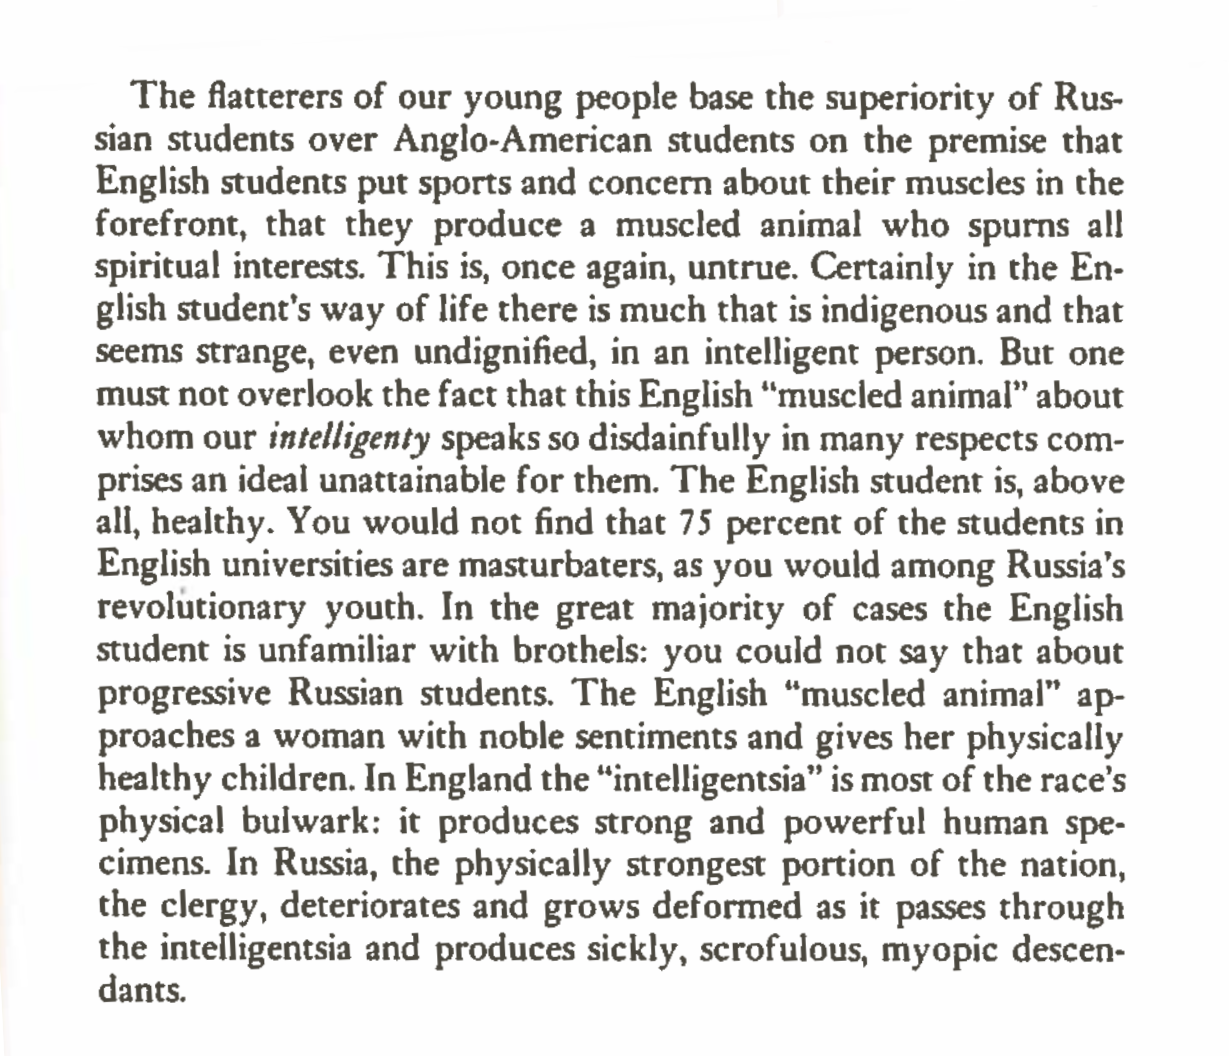 "...But one must not overlook the fact that this English “muscled animal” about whom our intelligentsia speaks so disdainfully in many respects comprises an ideal unattainable for them. The English student is, above all, healthy. You would not find that 75 percent of the students in English universities are masturbators, as you would among Russia’s revolutionary youth. In the great majority of cases the English student is unfamiliar with brothels: you could not say that about progressive Russian students. The English “muscled animal” approaches a woman with noble sentiments and gives her physically healthy children. In England the “intelligentsia” is most of the race’s physical bulwark: it produces strong and powerful human specimens..."